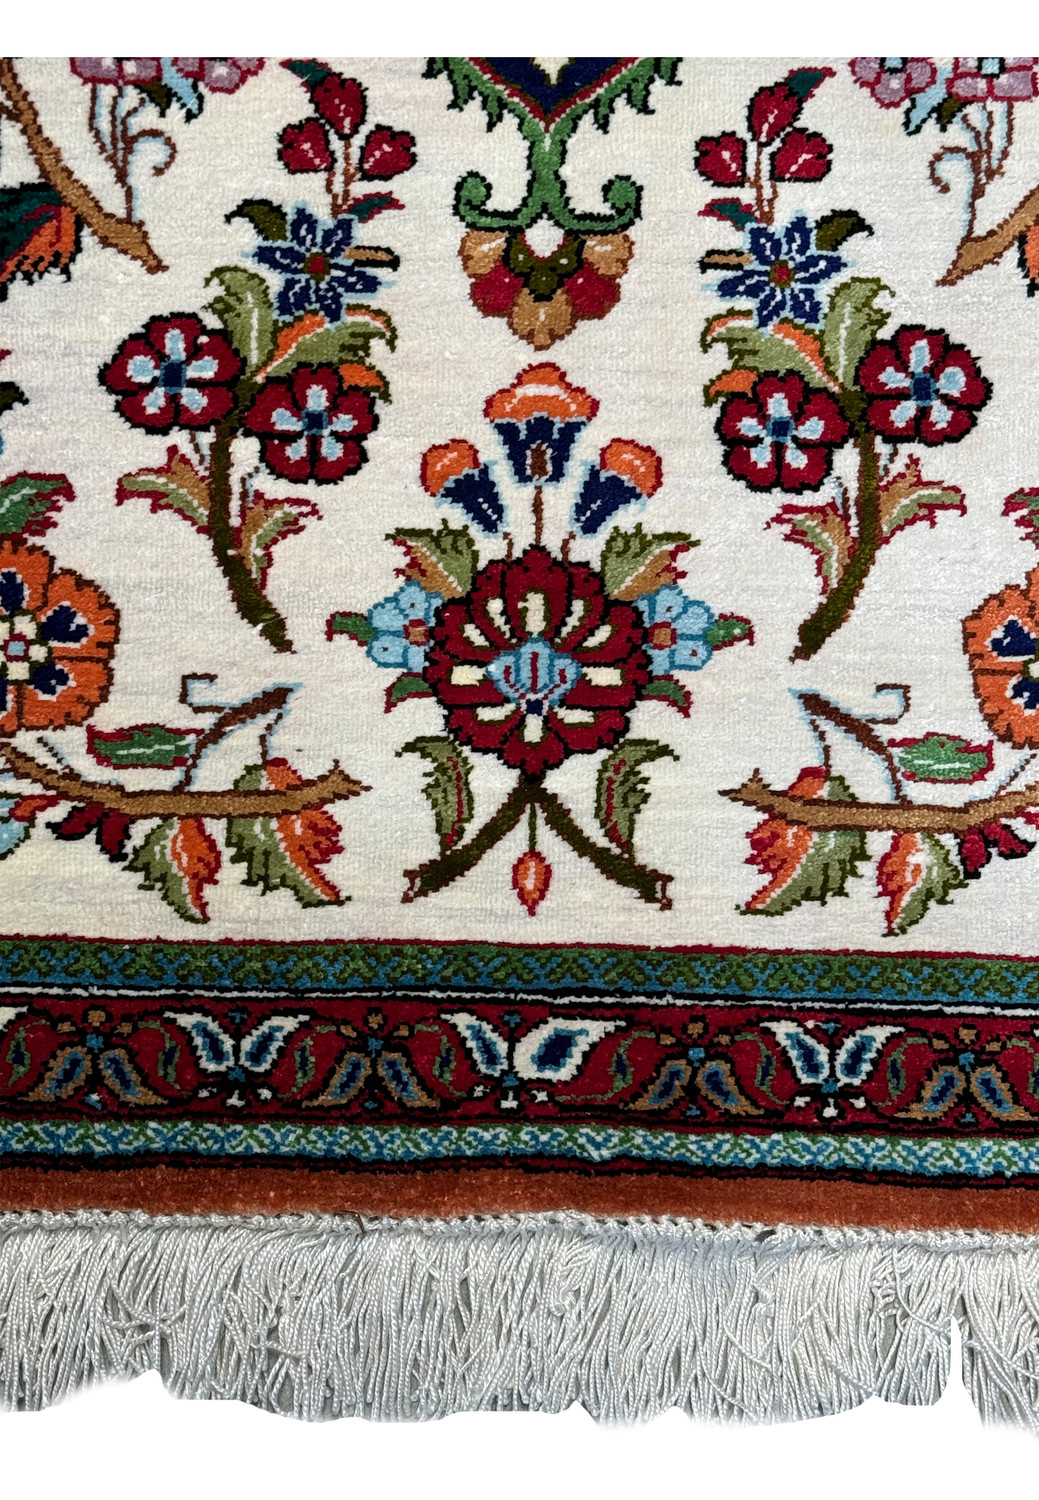 Zoomed-in view of the Persian Qum silk rug's texture and weave, with a focus on the vivid floral patterns and craftsmanship